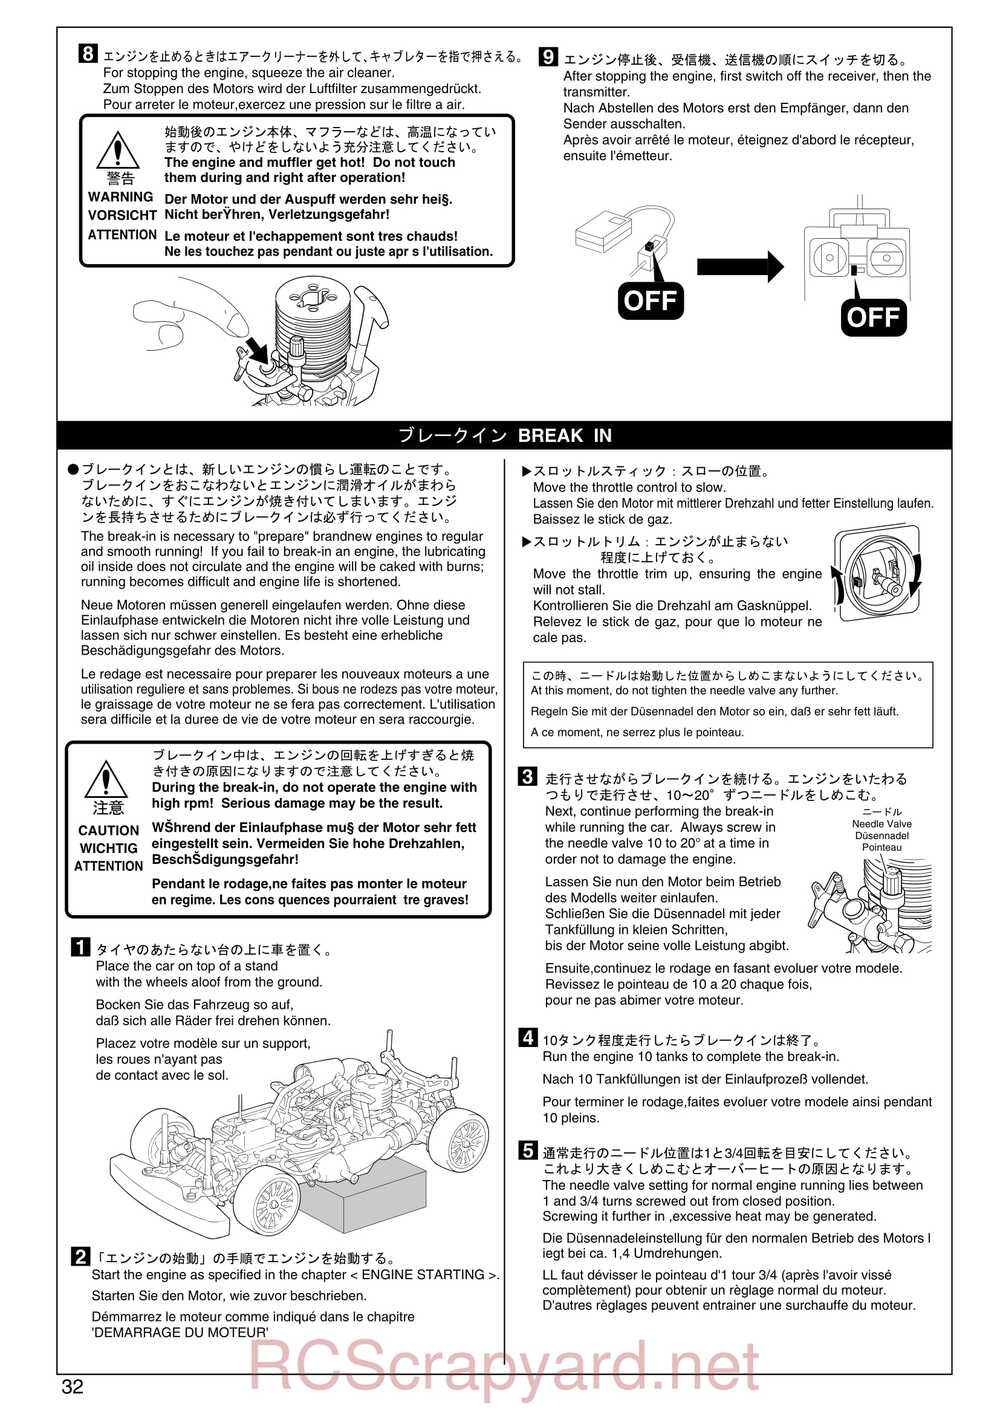 Kyosho - 31241 - V-One-S - Manual - Page 32